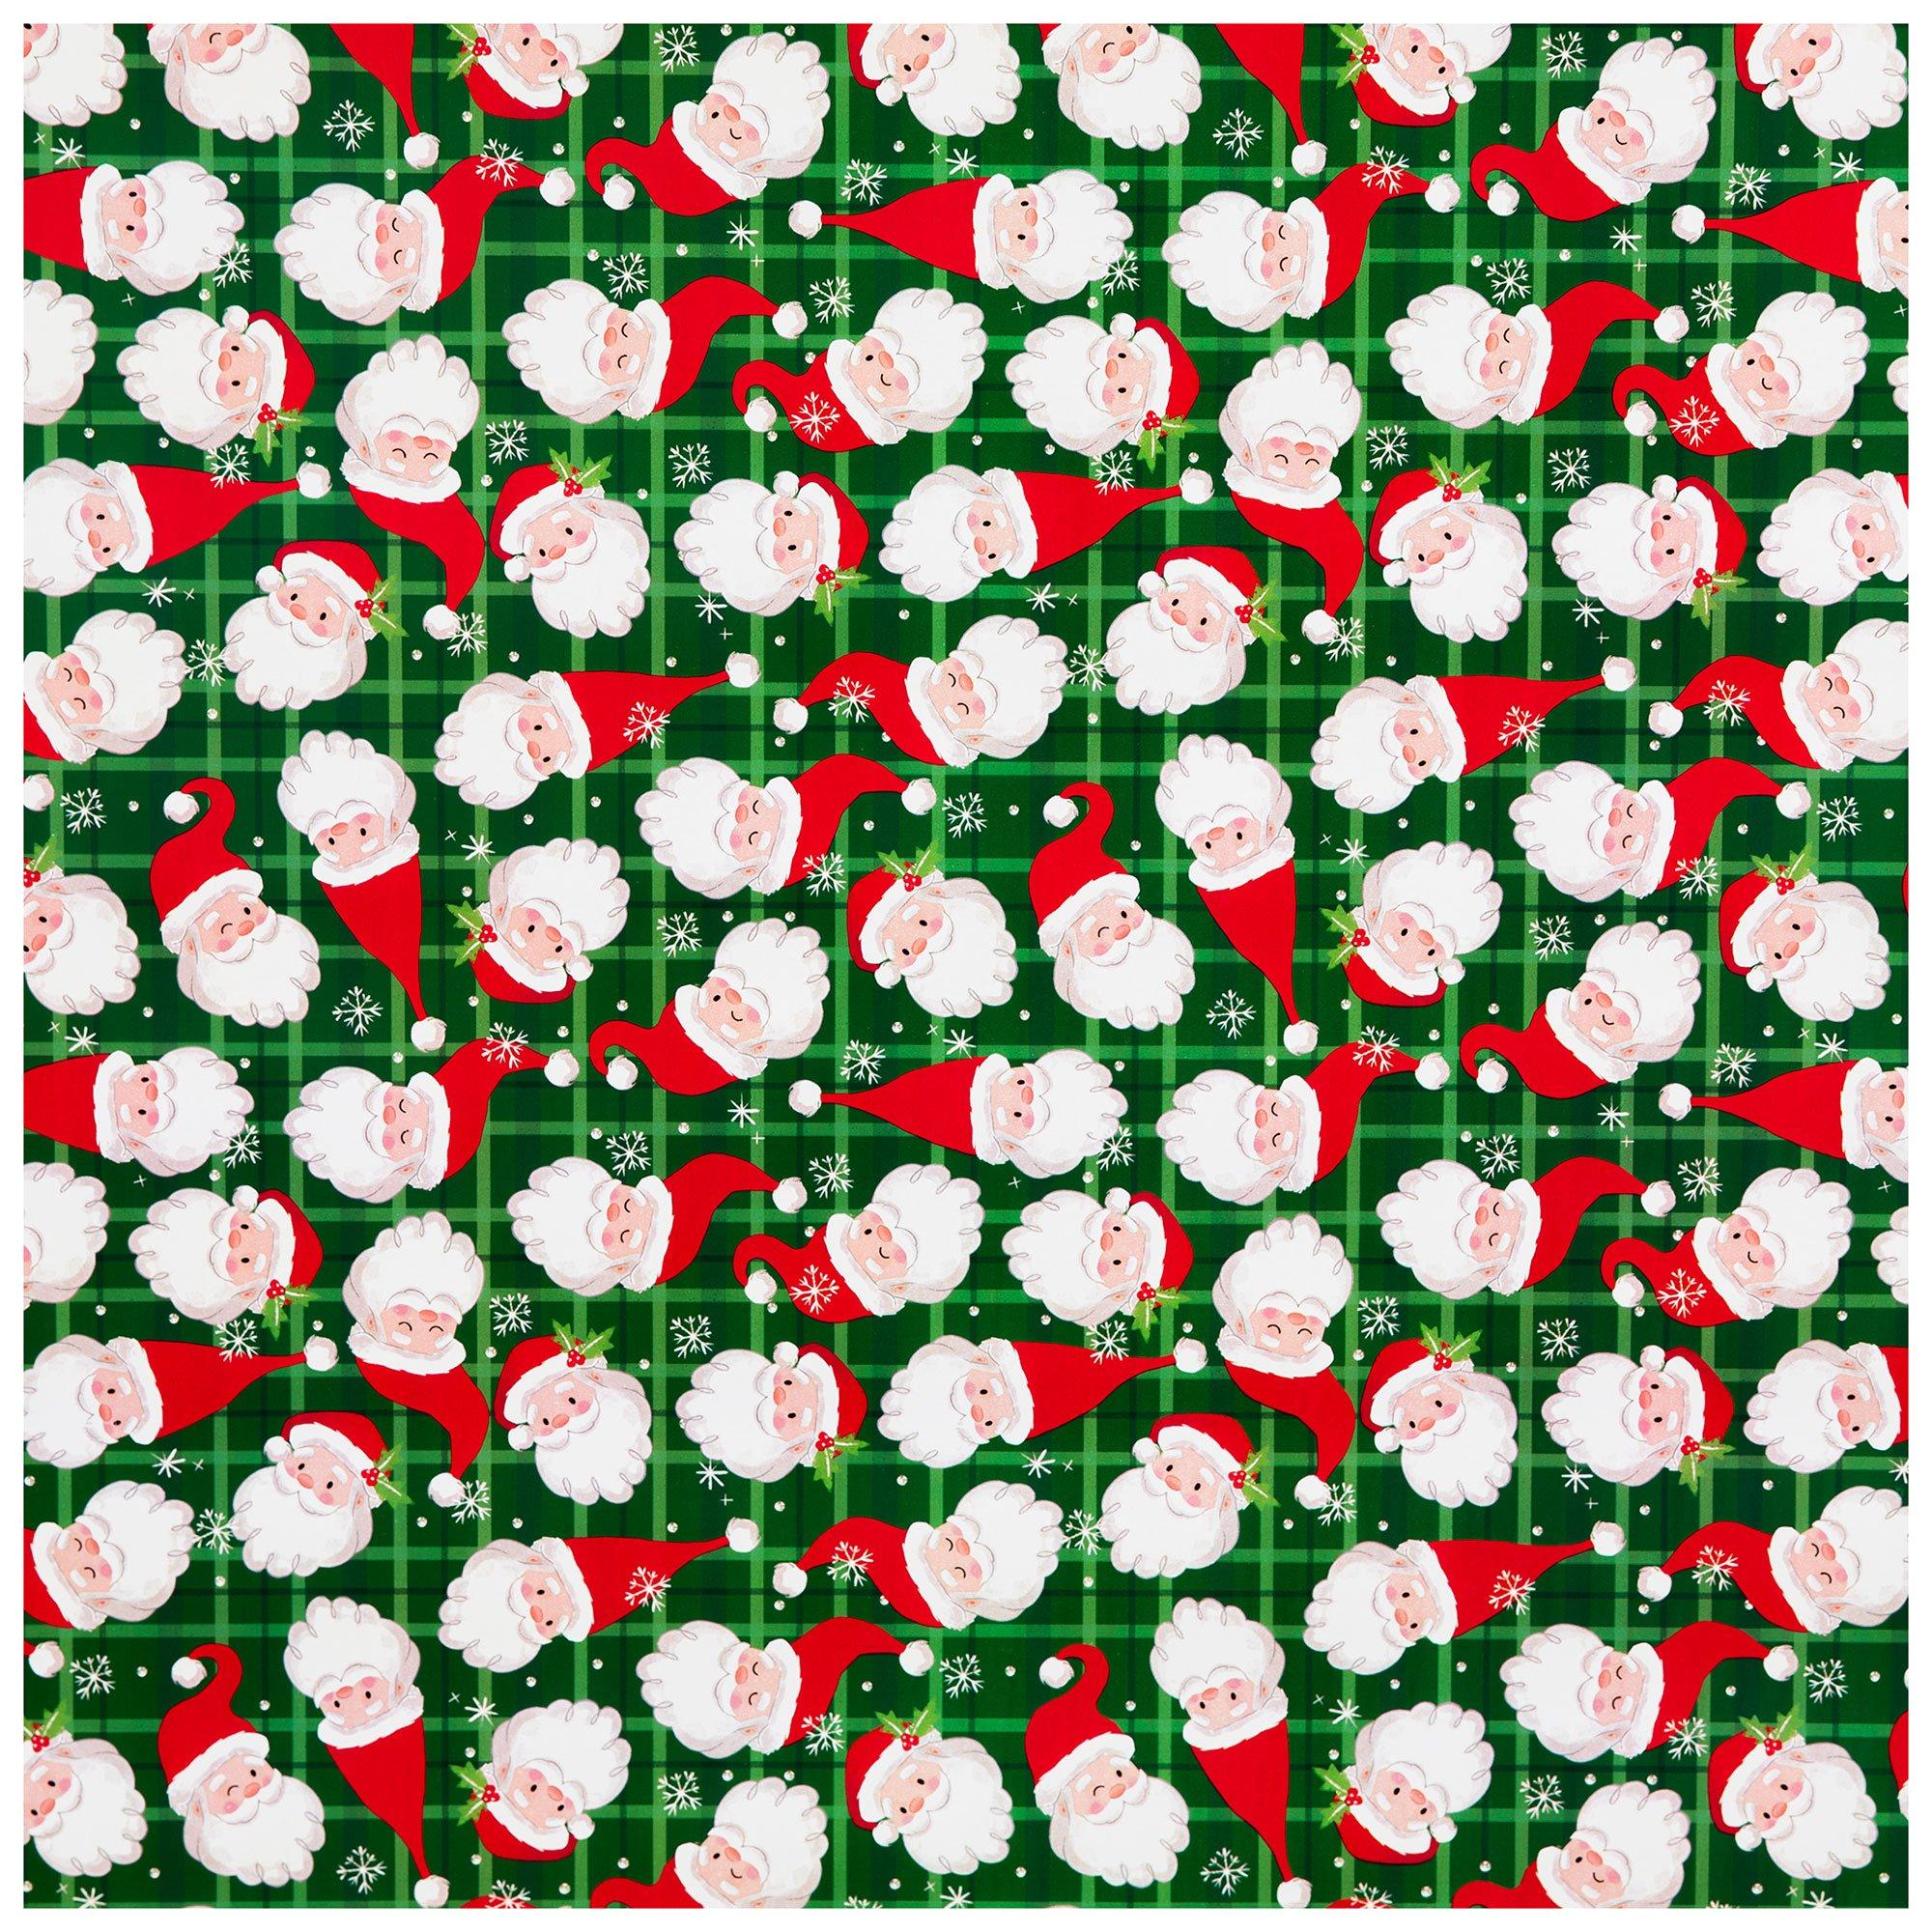 christmas wrapping paper designs